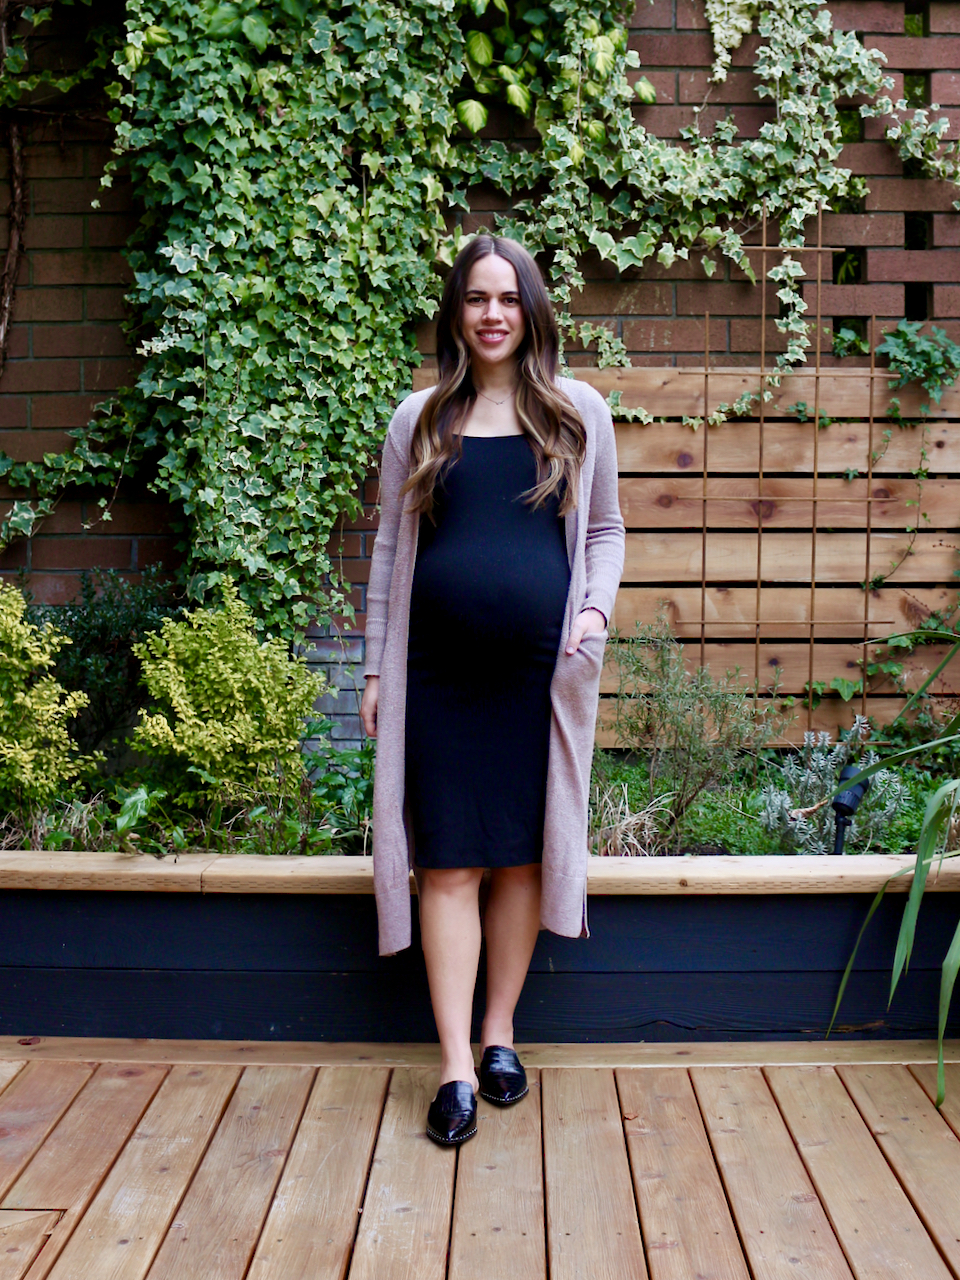 Jules in Flats - Bodycon Midi Dress with Duster Cardigan (Business Casual Workwear on a Budget)